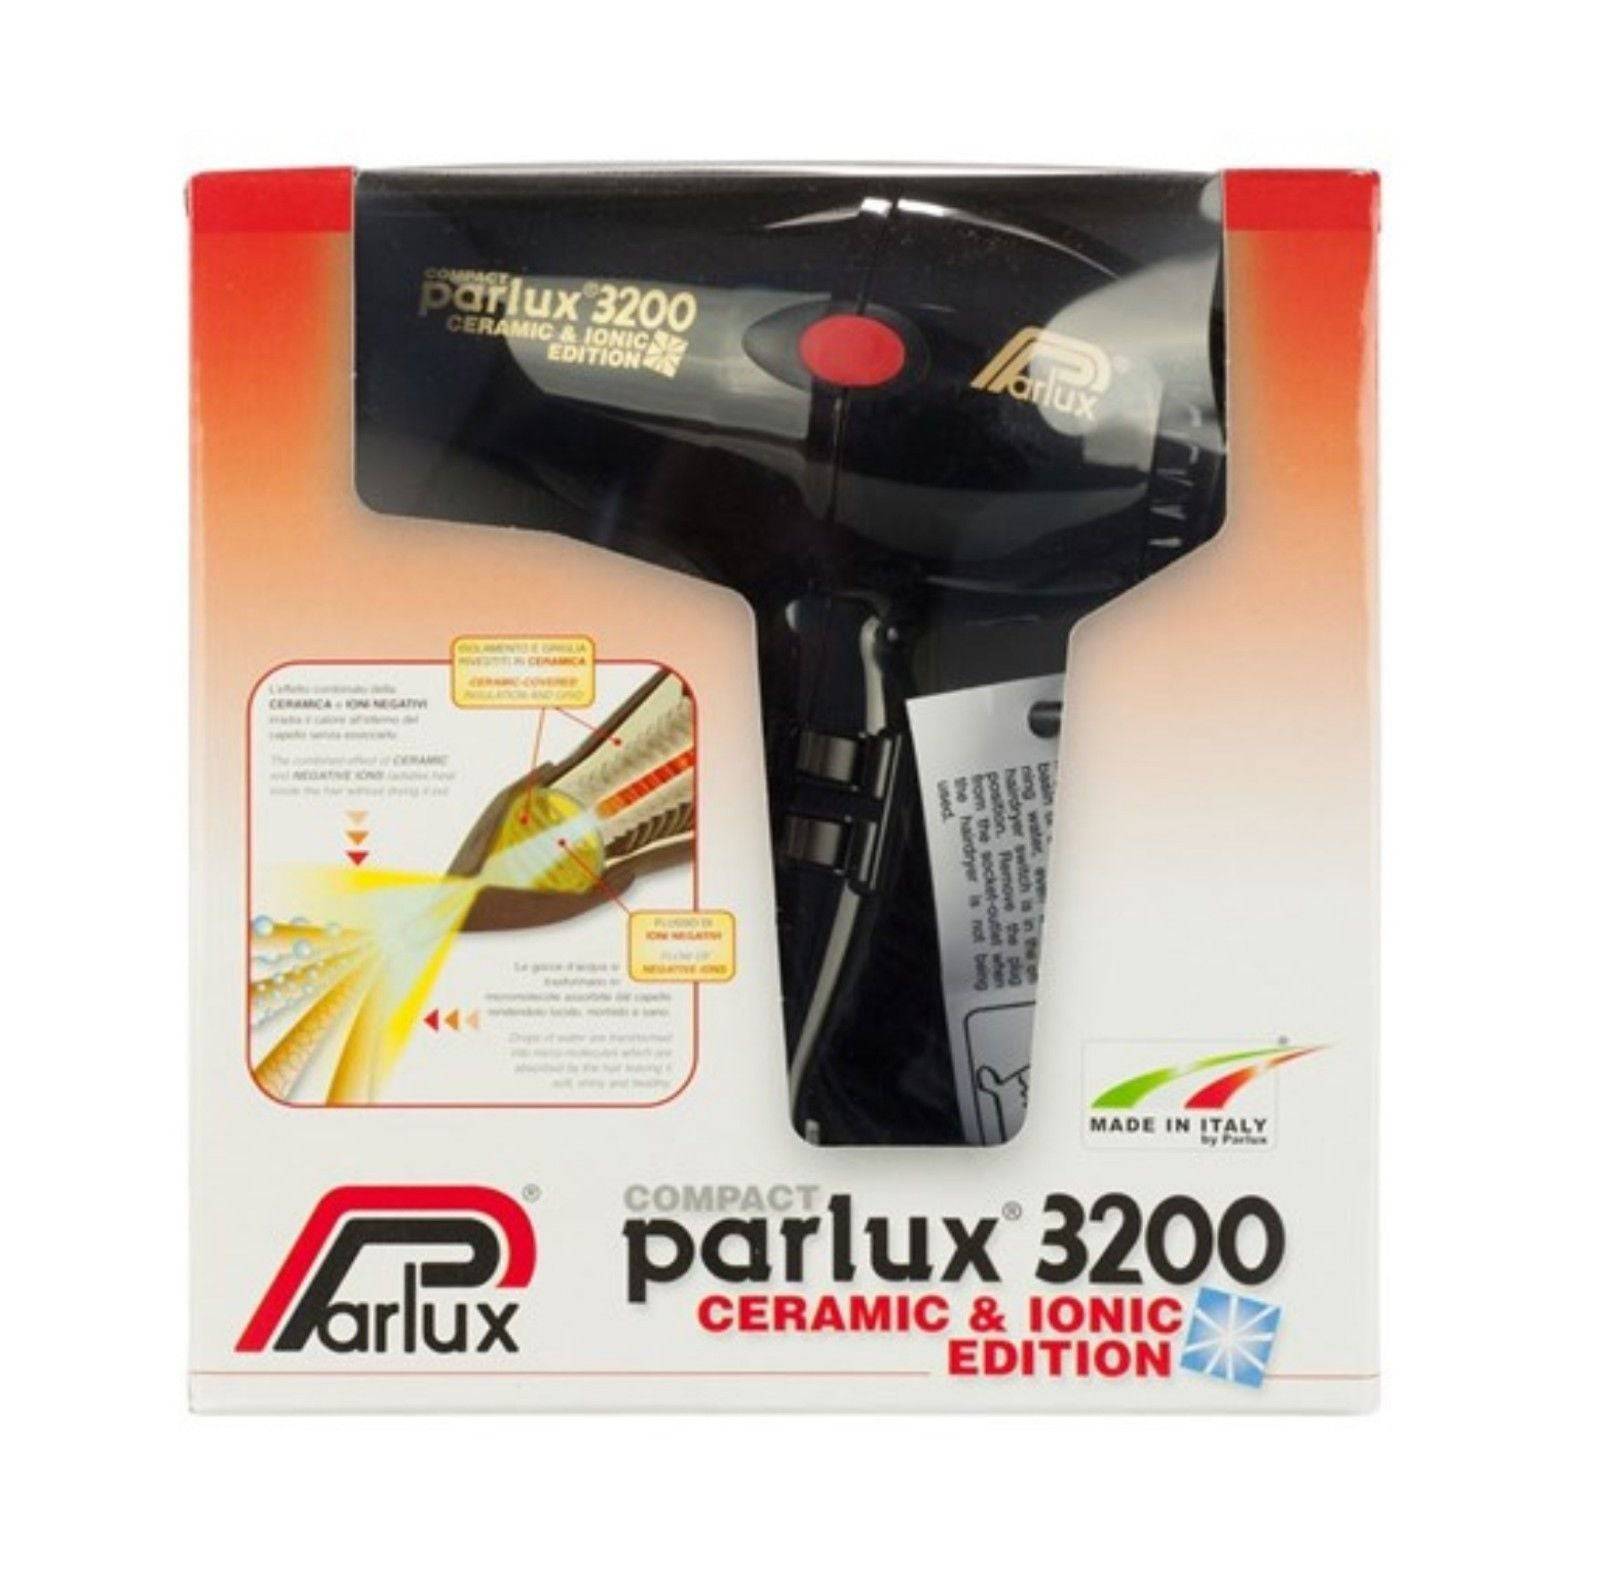 Parlux 3200 Ionic + Ceramic Compact Hair Dryer - Black 2 year Warranty  W510g - On Line Hair Depot